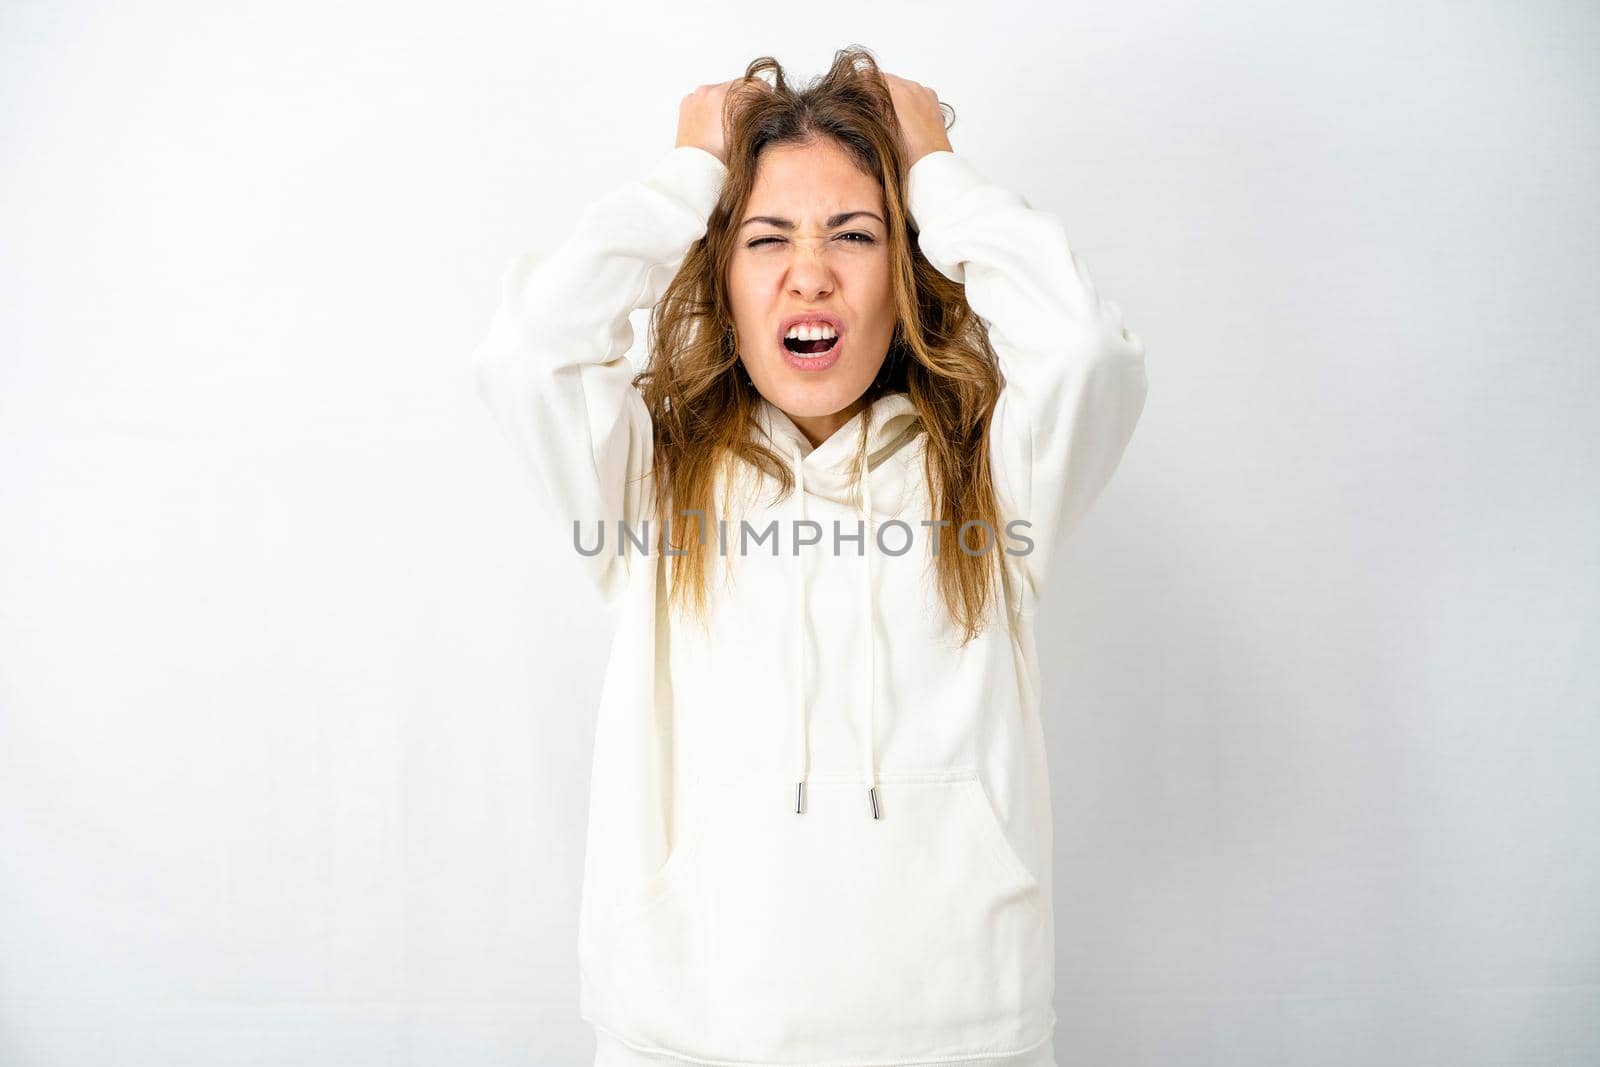 Young model isolated on white background tears hair out with despair face expressing anger by screaming with her mouth open and closed eyes. Concept of modern times stressed and frustrated woman by robbyfontanesi